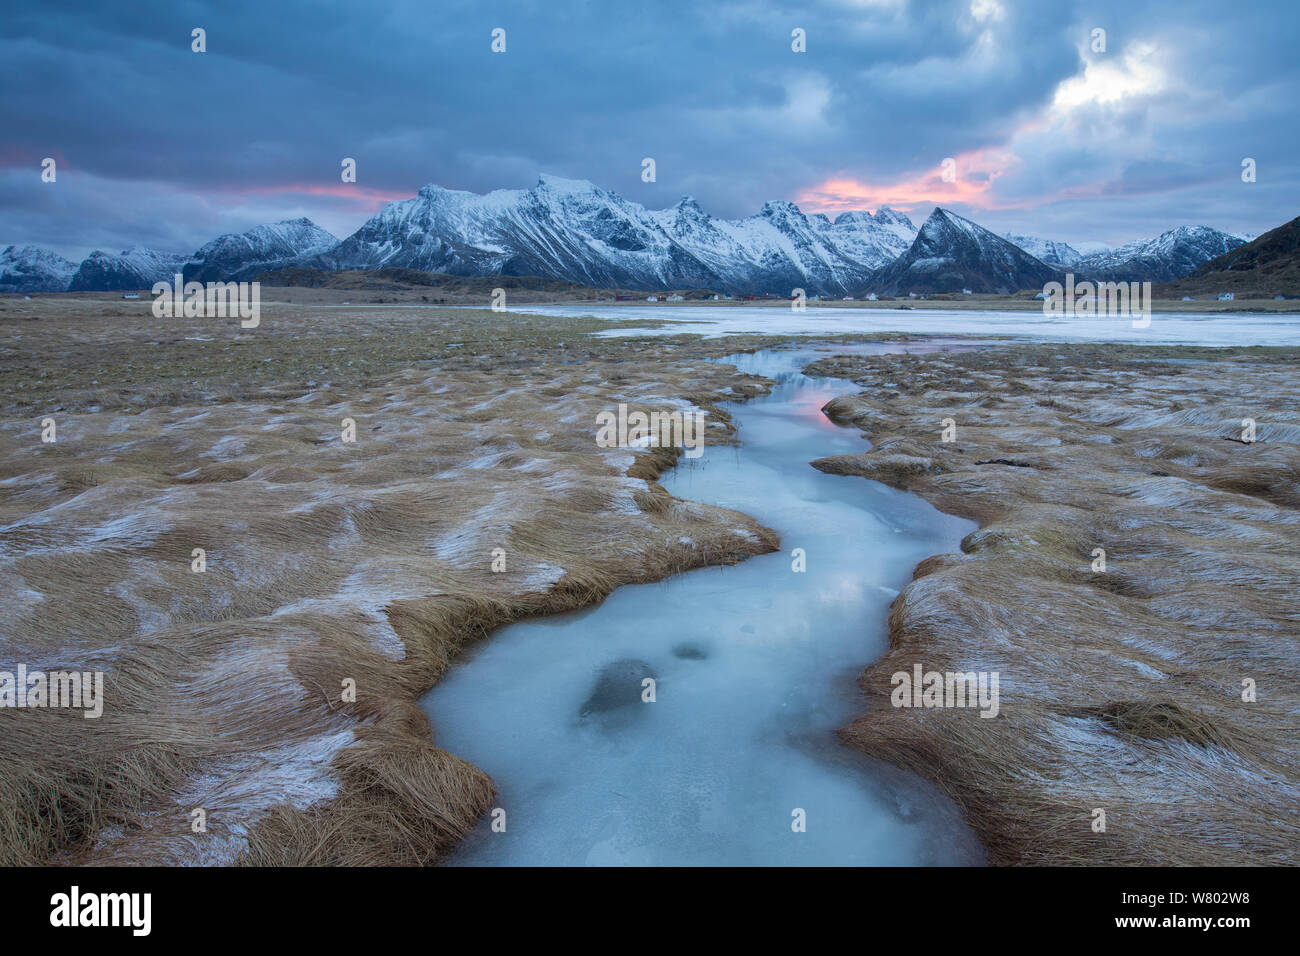 Saltmarsh with small stream, and mountain landscape at dawn in winter, Flakstadoya, Lofoten, Norway. February 2014 Stock Photo